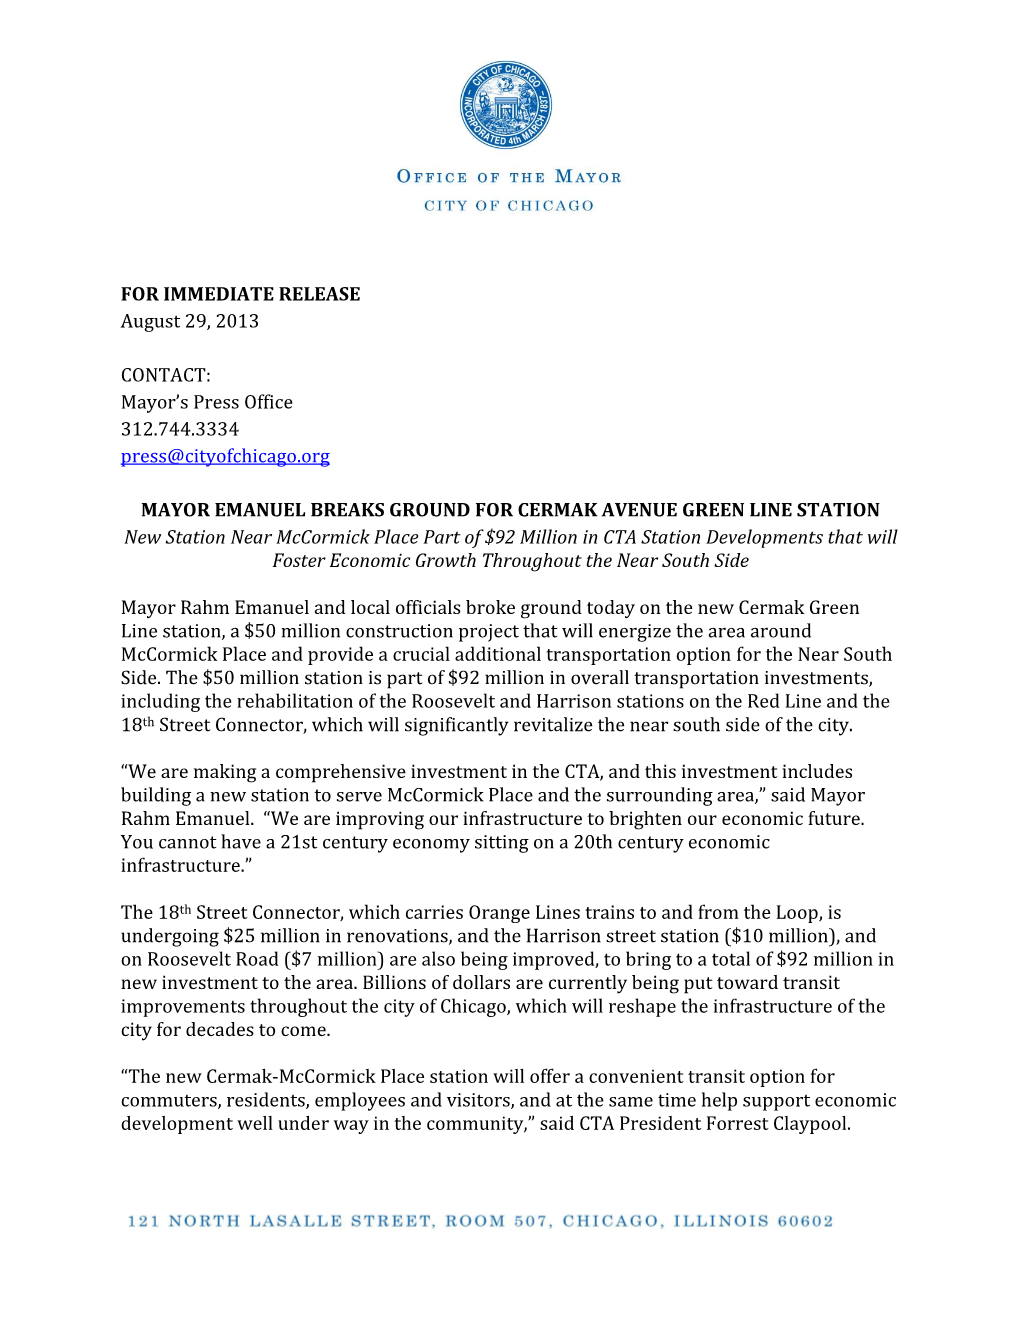 FOR IMMEDIATE RELEASE August 29, 2013 CONTACT: Mayor's Press